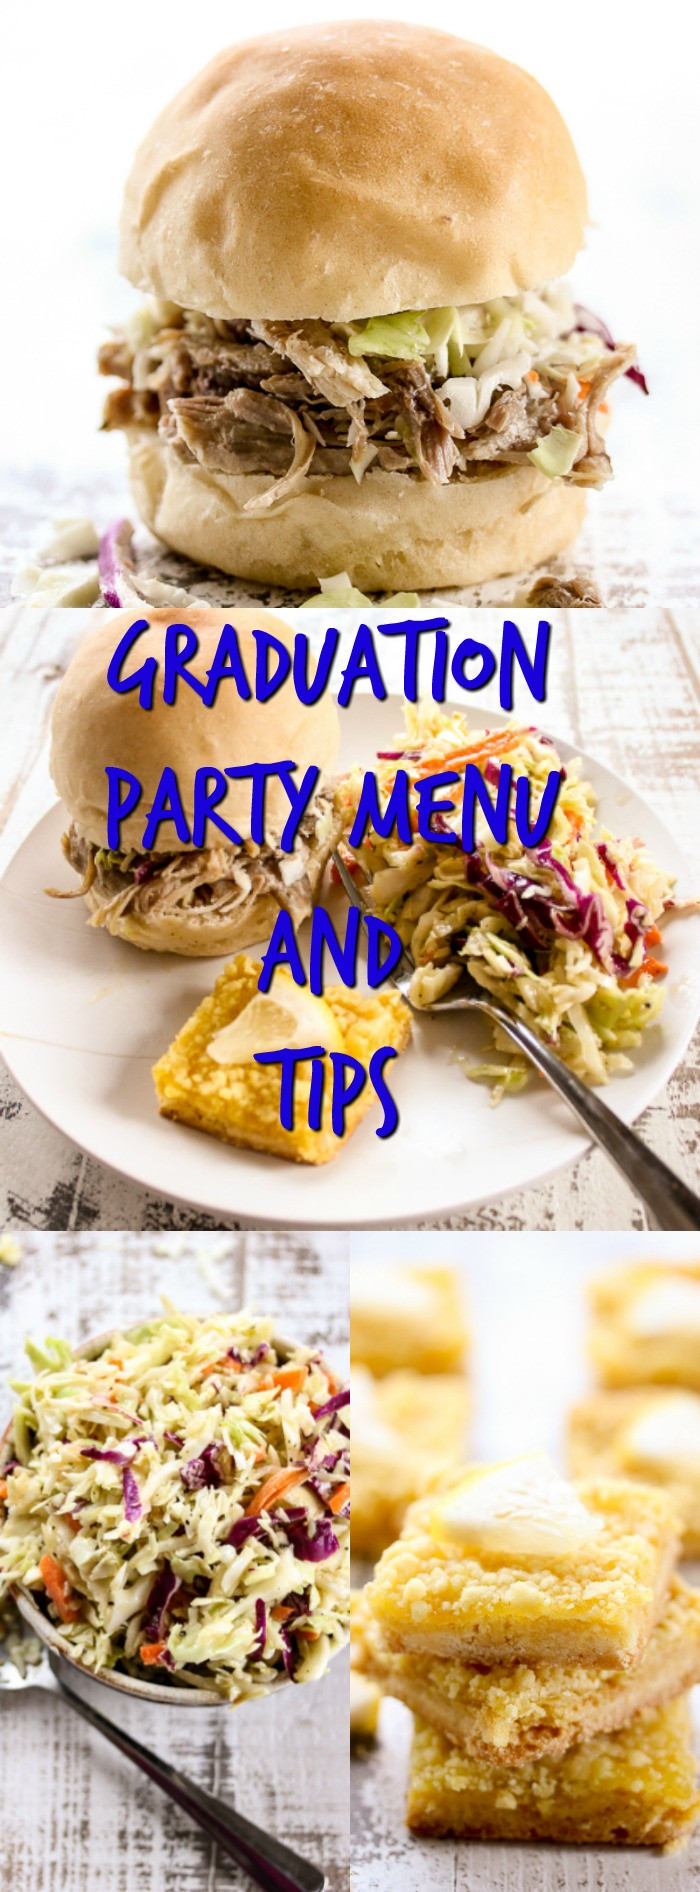 Great Graduation Party Food Ideas
 Graduation Party Menu and Tips Lisa s Dinnertime Dish